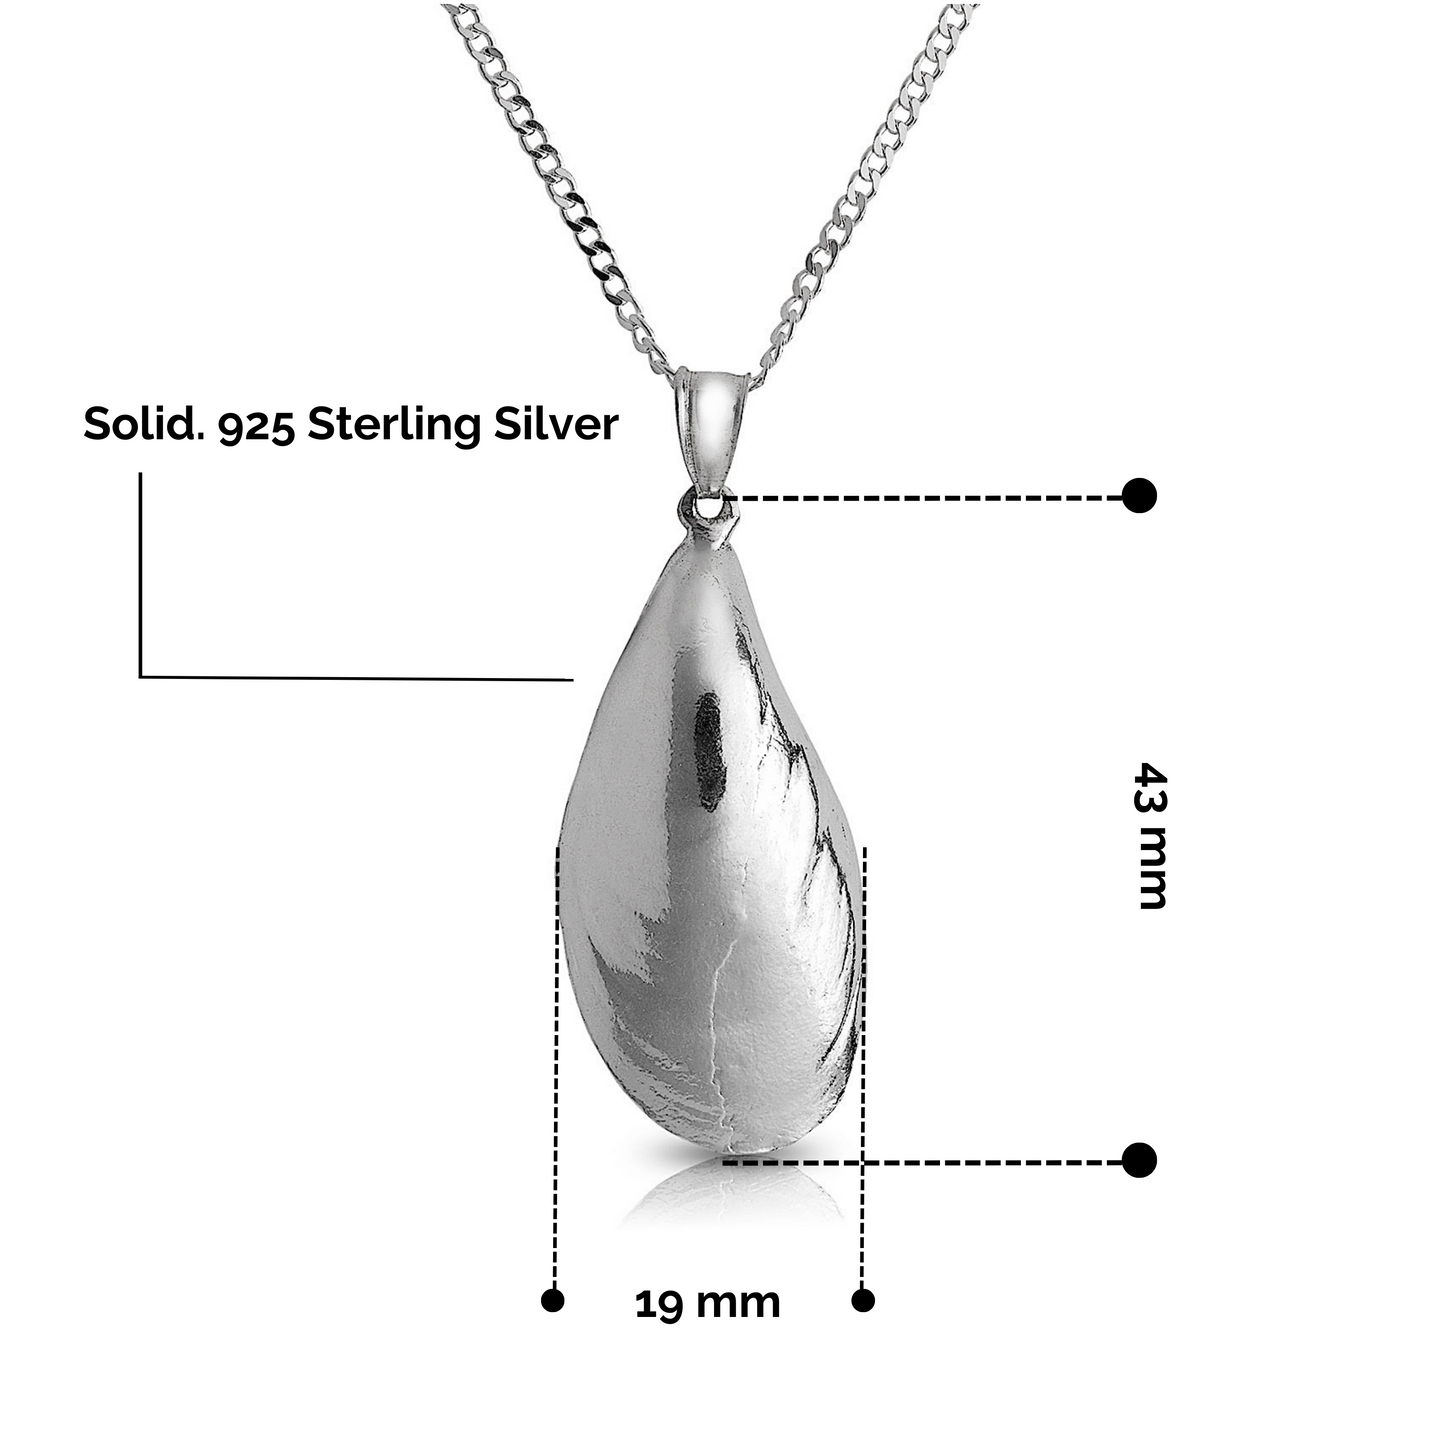 Better Jewelry Mussel shell Pendant w. Cuban chain .925 Sterling Silver made in the USA